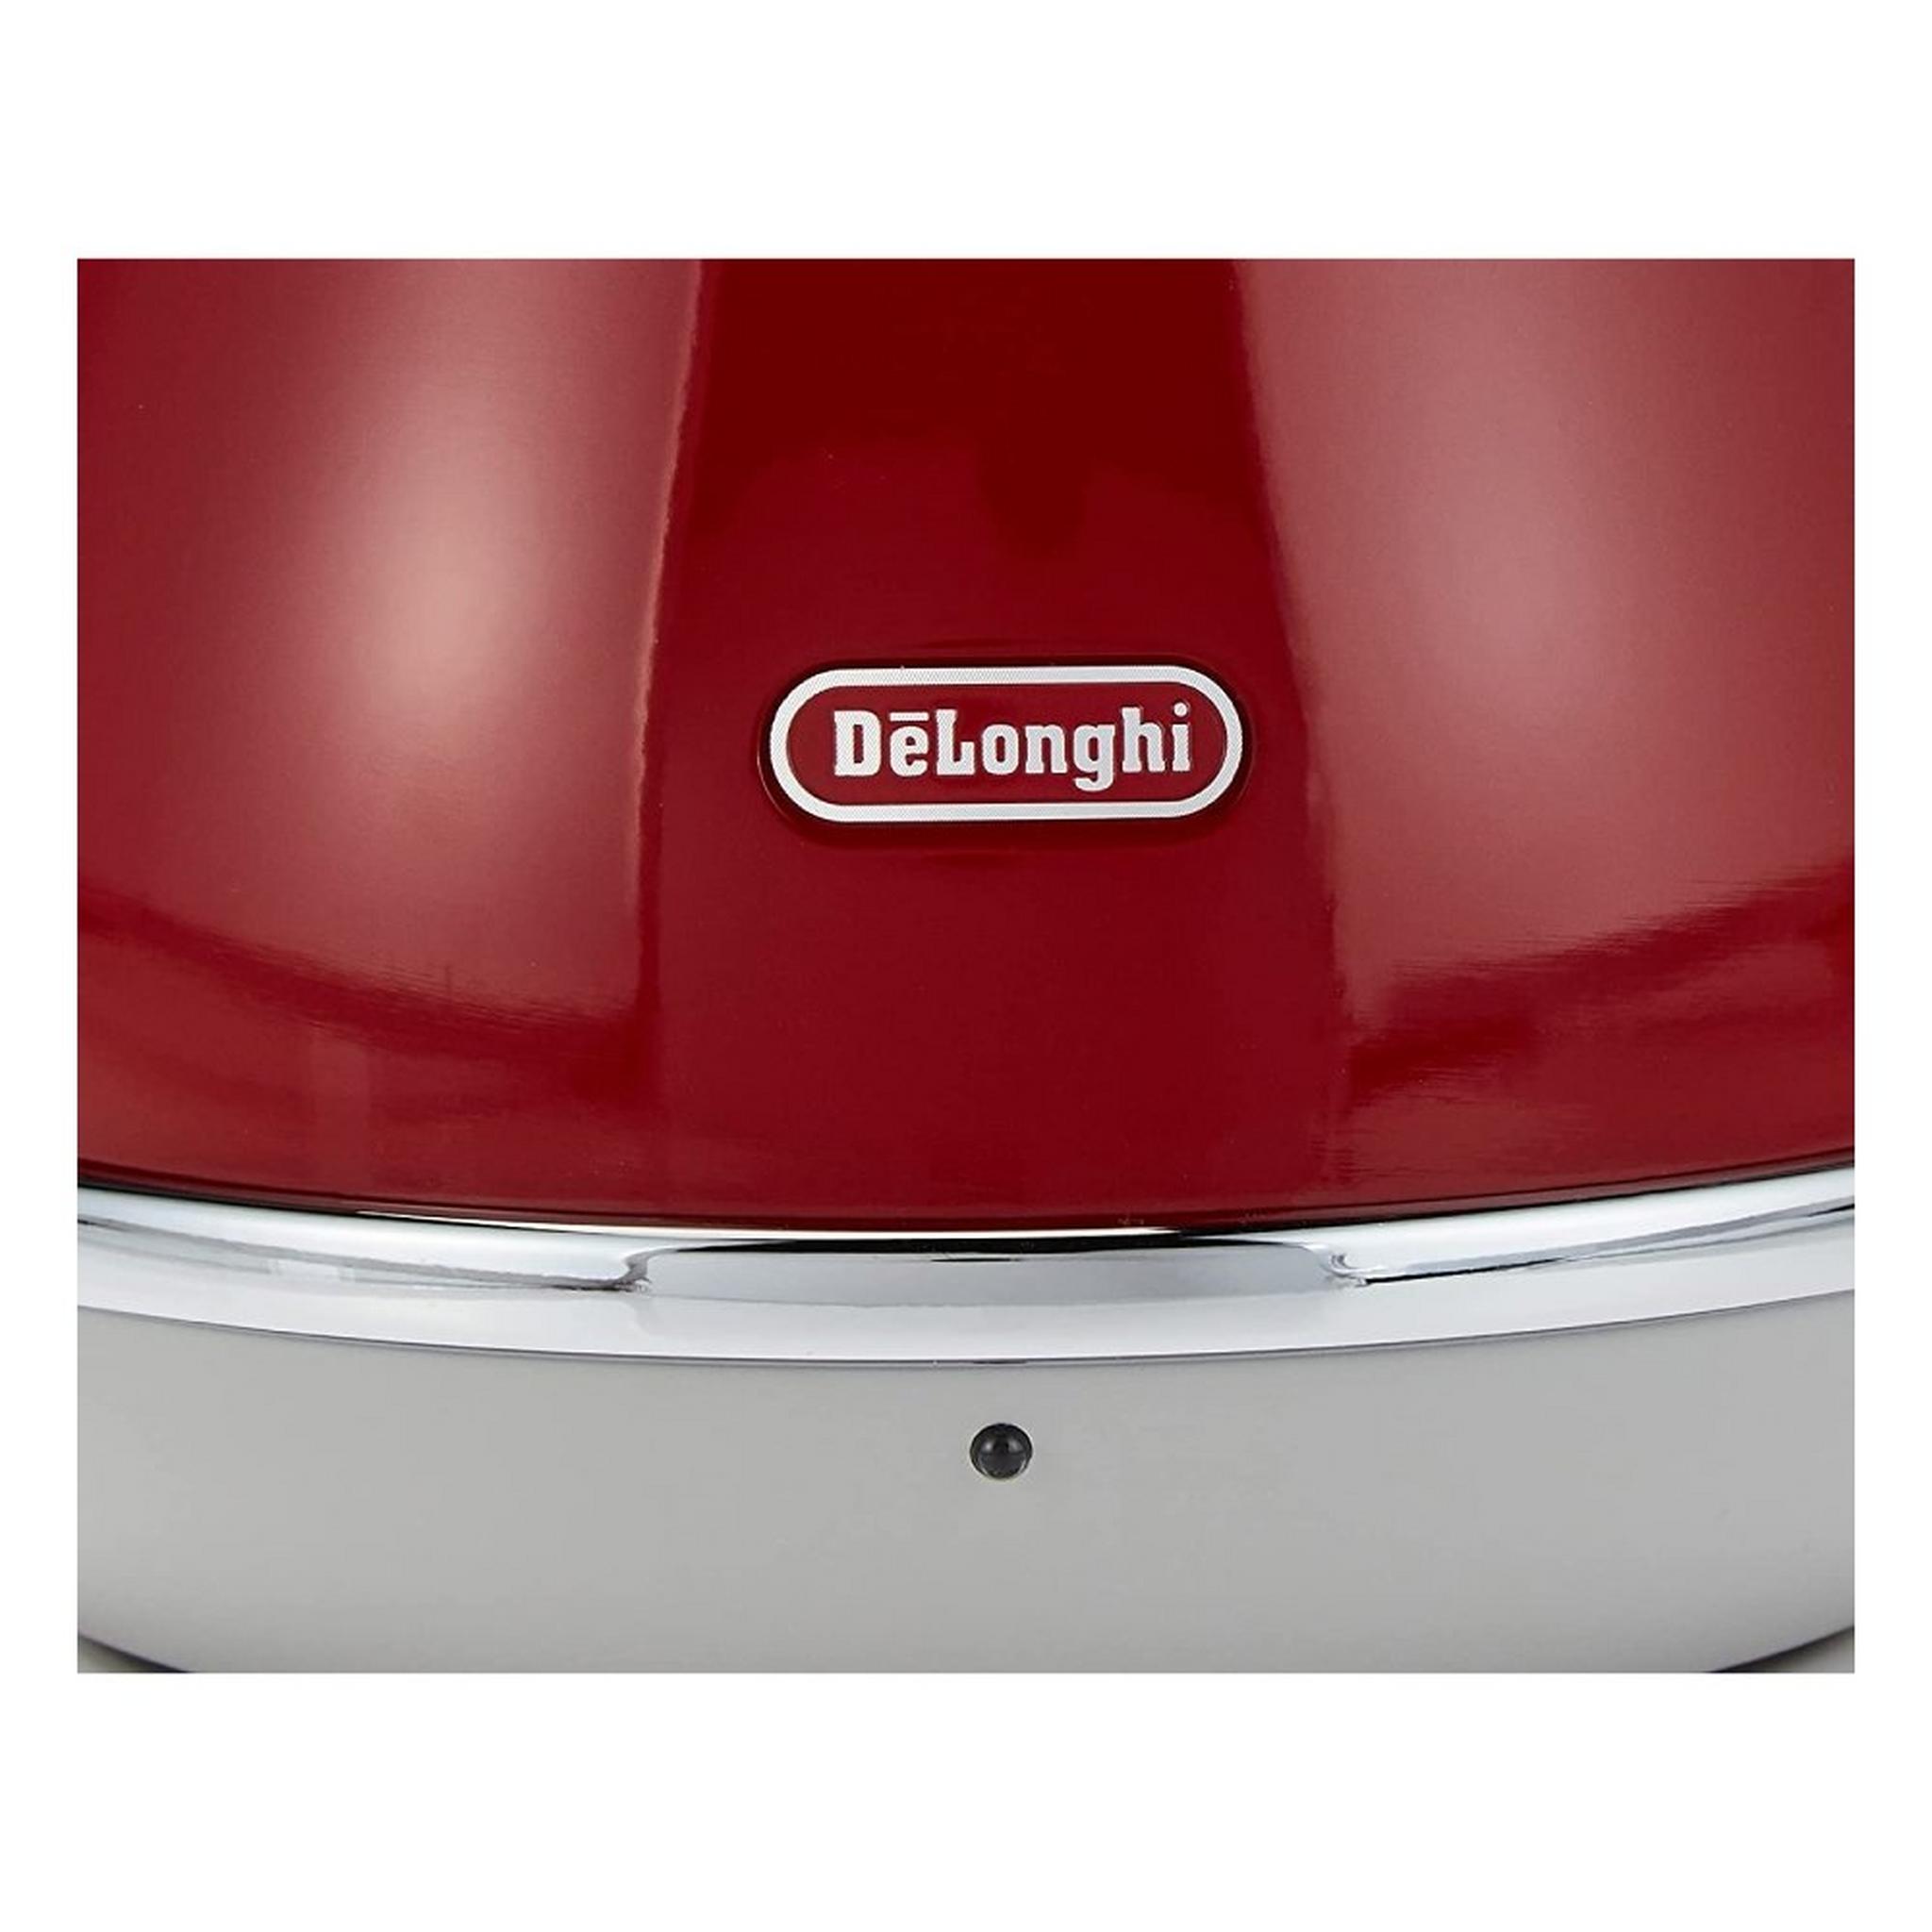 De'Longhi Icona Capitals Kettle,1.7 liters 3000W Red